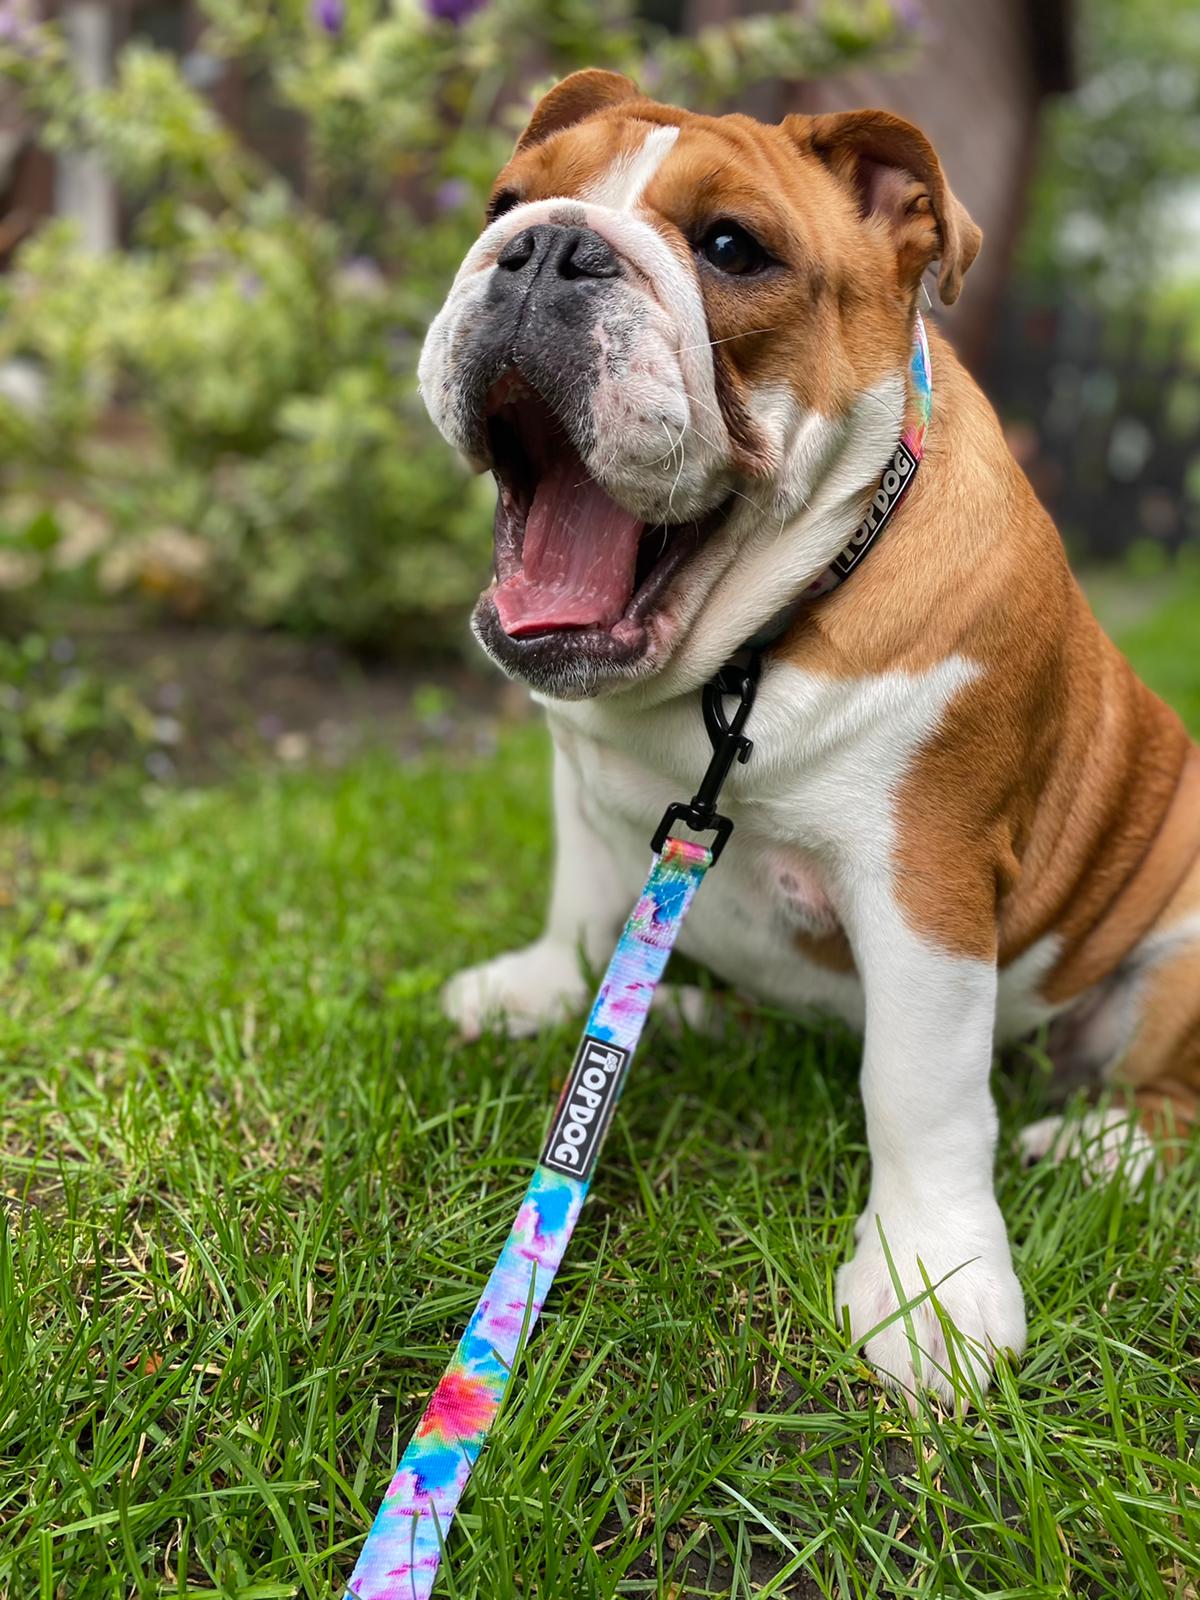 Bulldog wearing TopDog Harnesses To Dye For Dog Collar and matching lead, sitting on the grass yawning